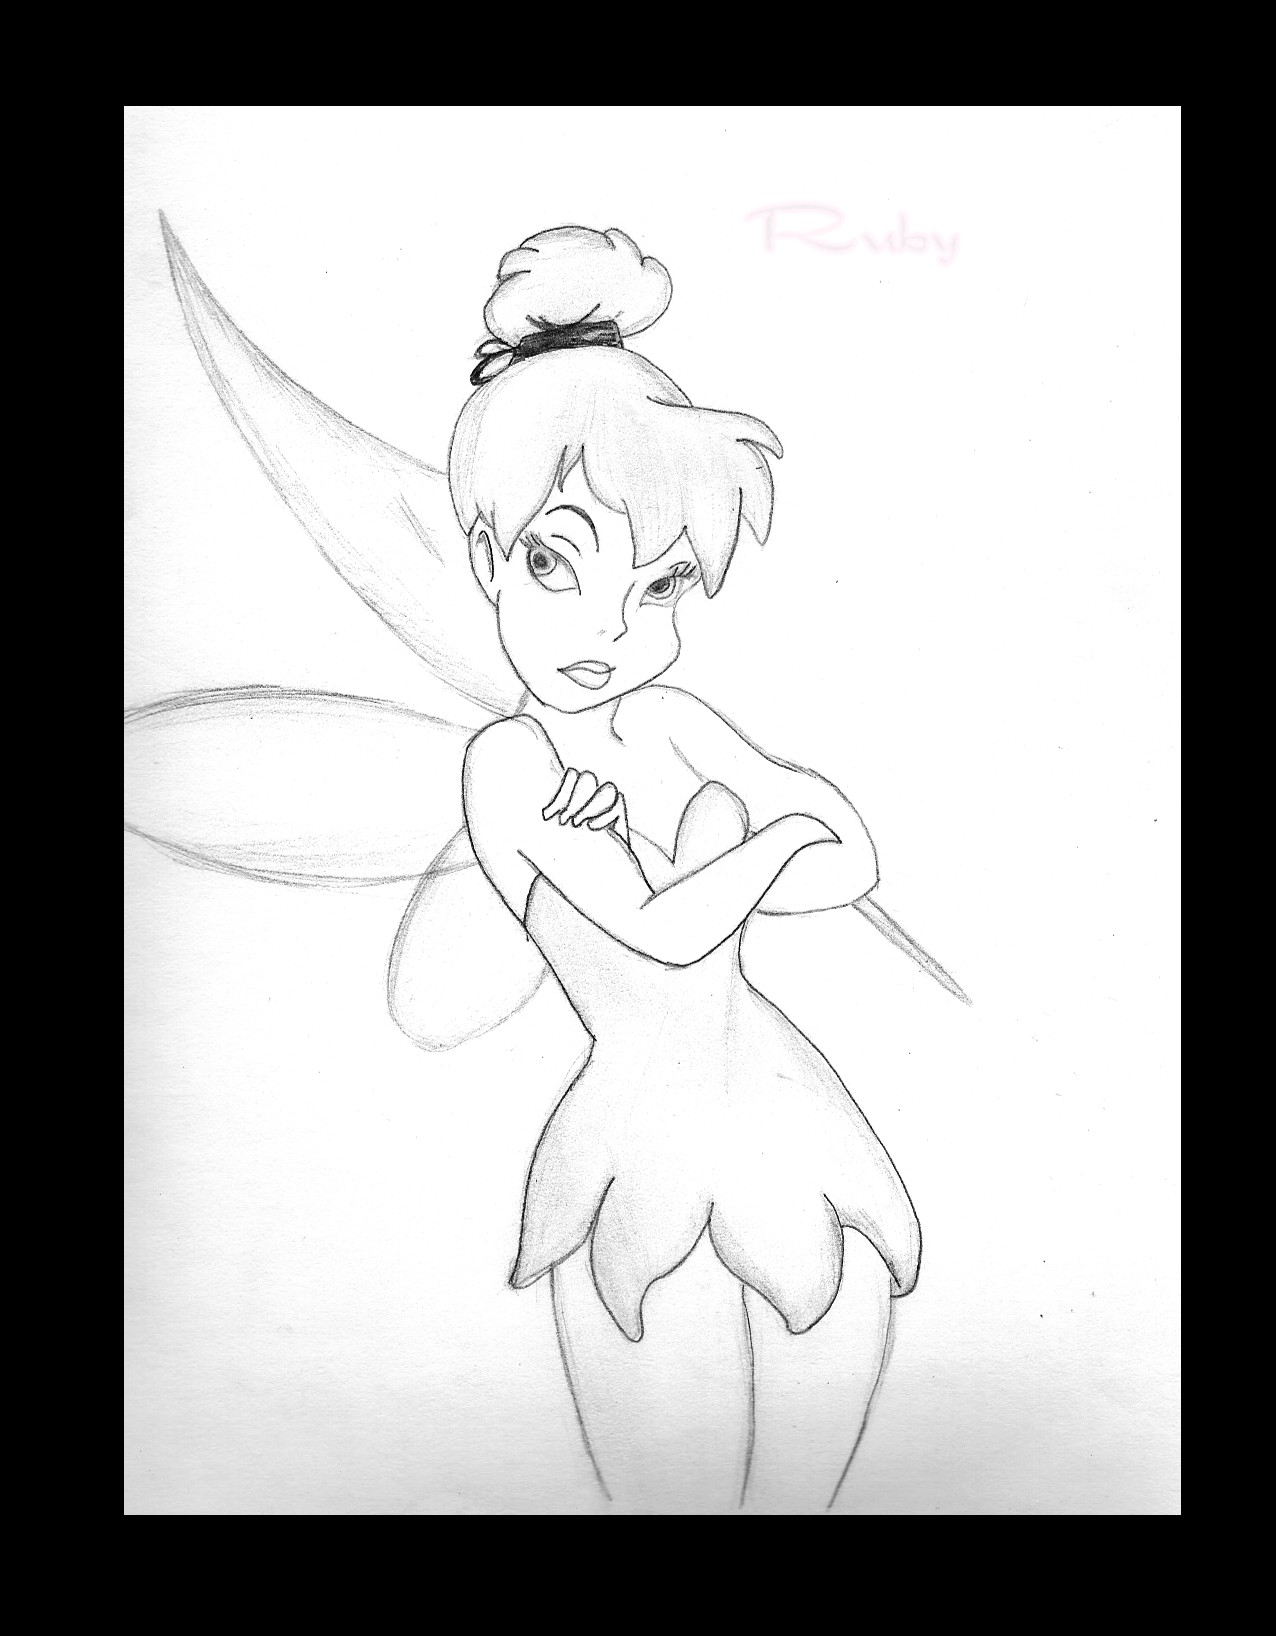 TinkerBell by Lipkiss